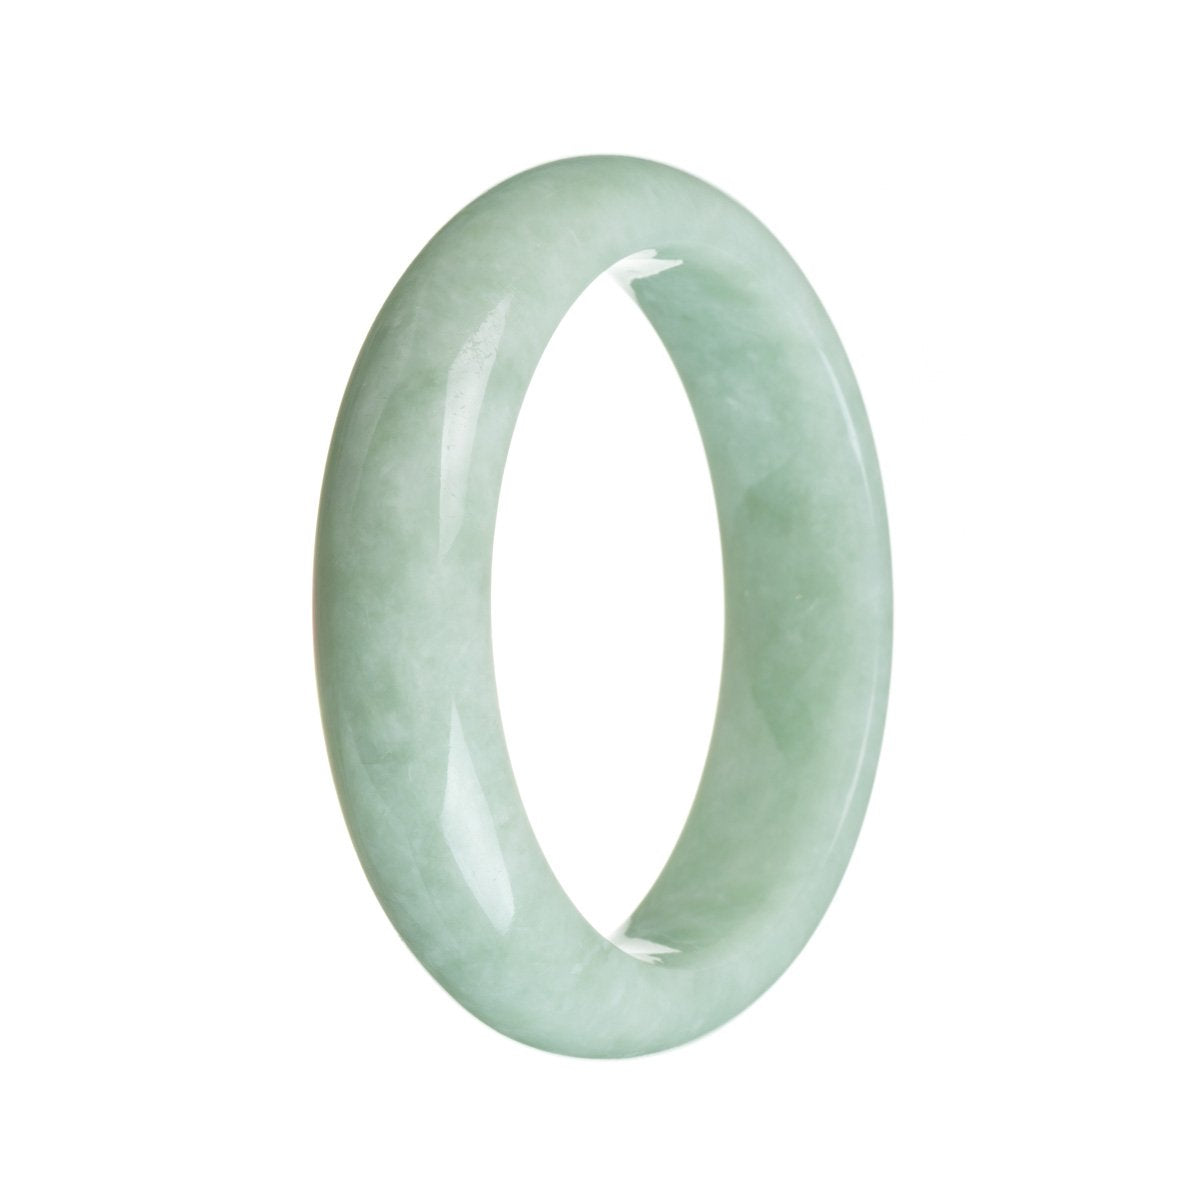 A half moon-shaped green jadeite jade bracelet, certified as natural light green in color, from MAYS GEMS, measuring 58mm in size.